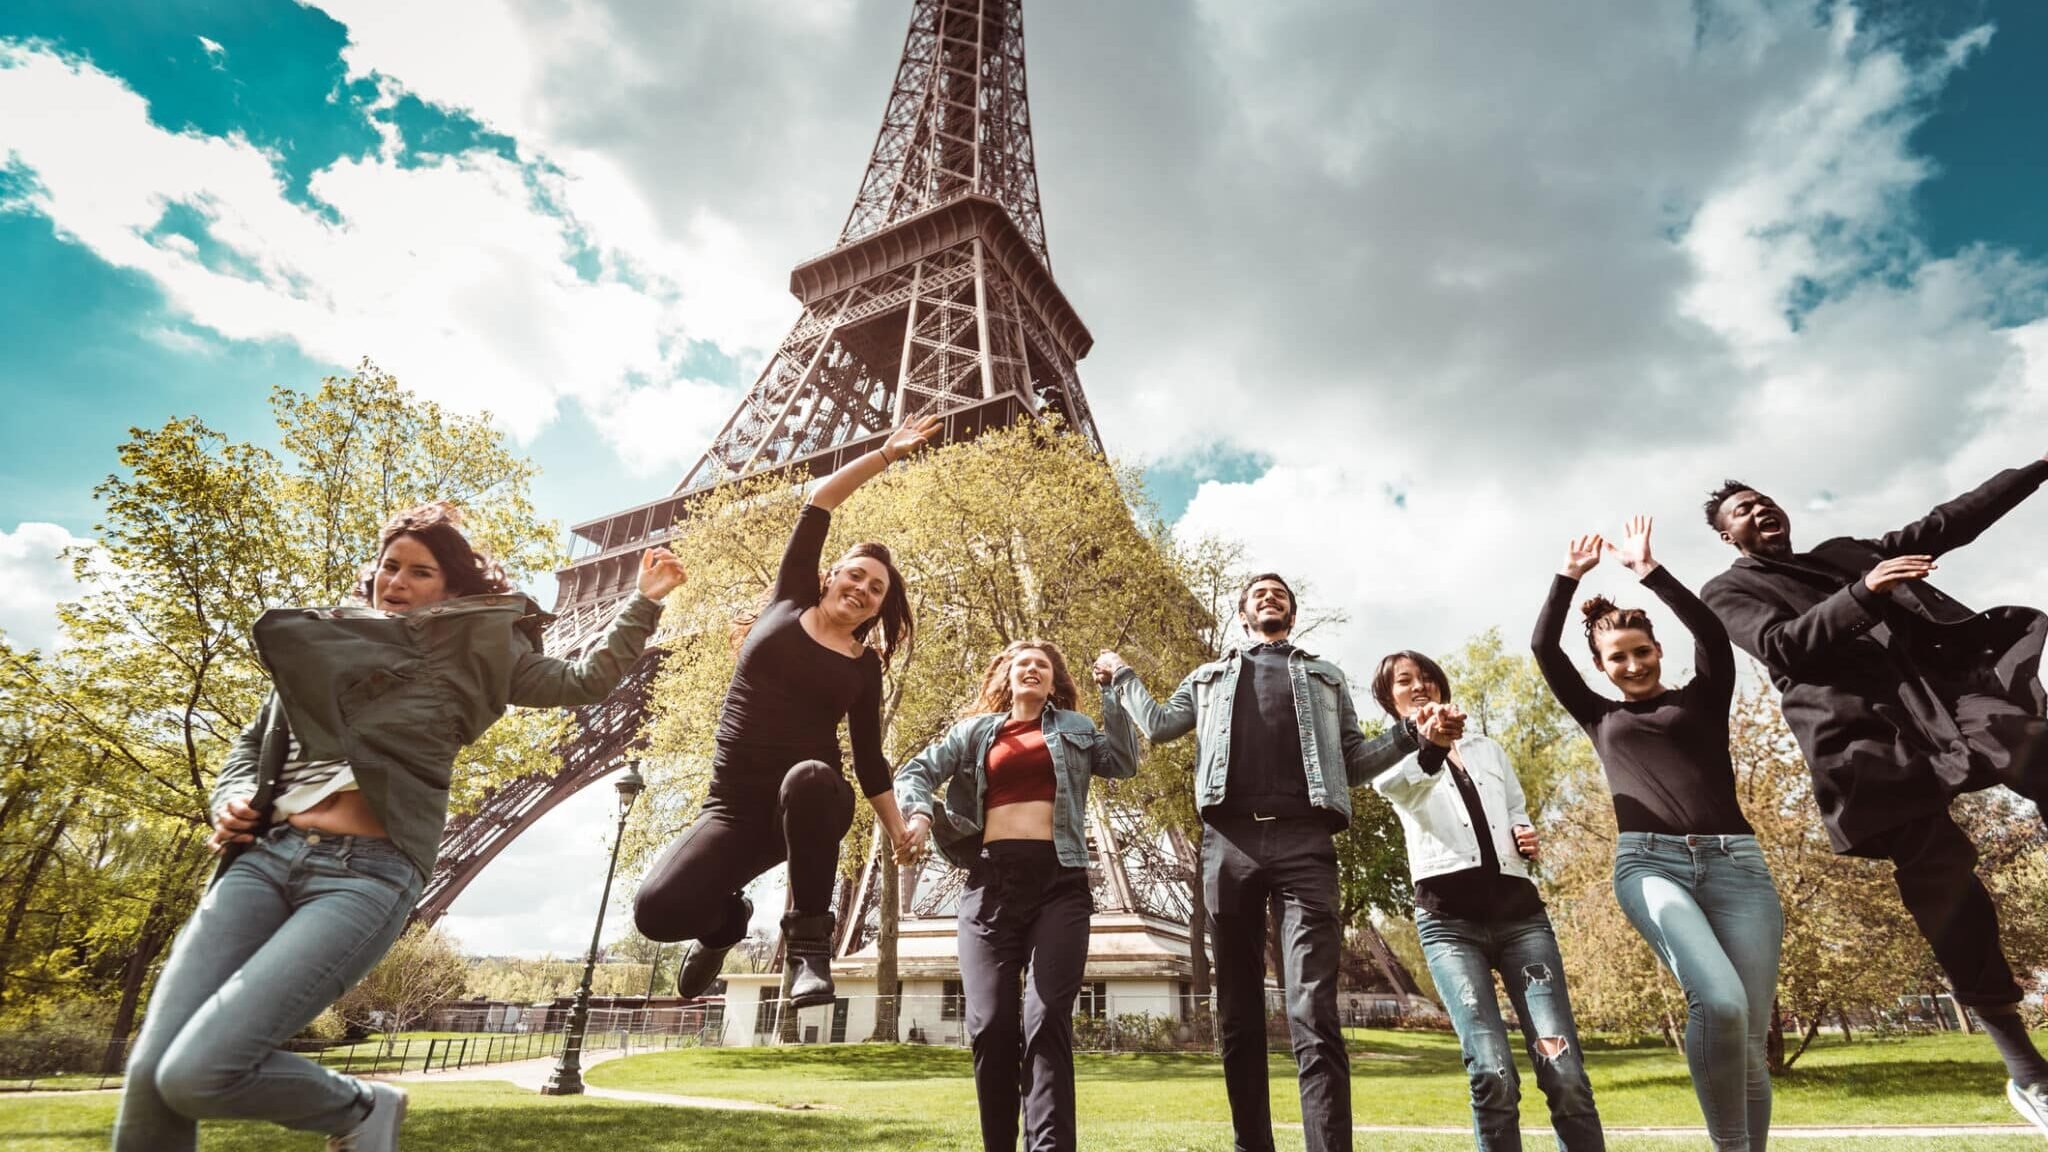 <p>Paris is an iconic Europe destination that screams expensive. But it's possible to book an affordable flight. Use the money you save on airfare visiting cafes, having a romantic dinner at one of the fine French cuisine restaurants, and touring the Louvre, Versailles Palace, and the Eiffel Tower.</p>